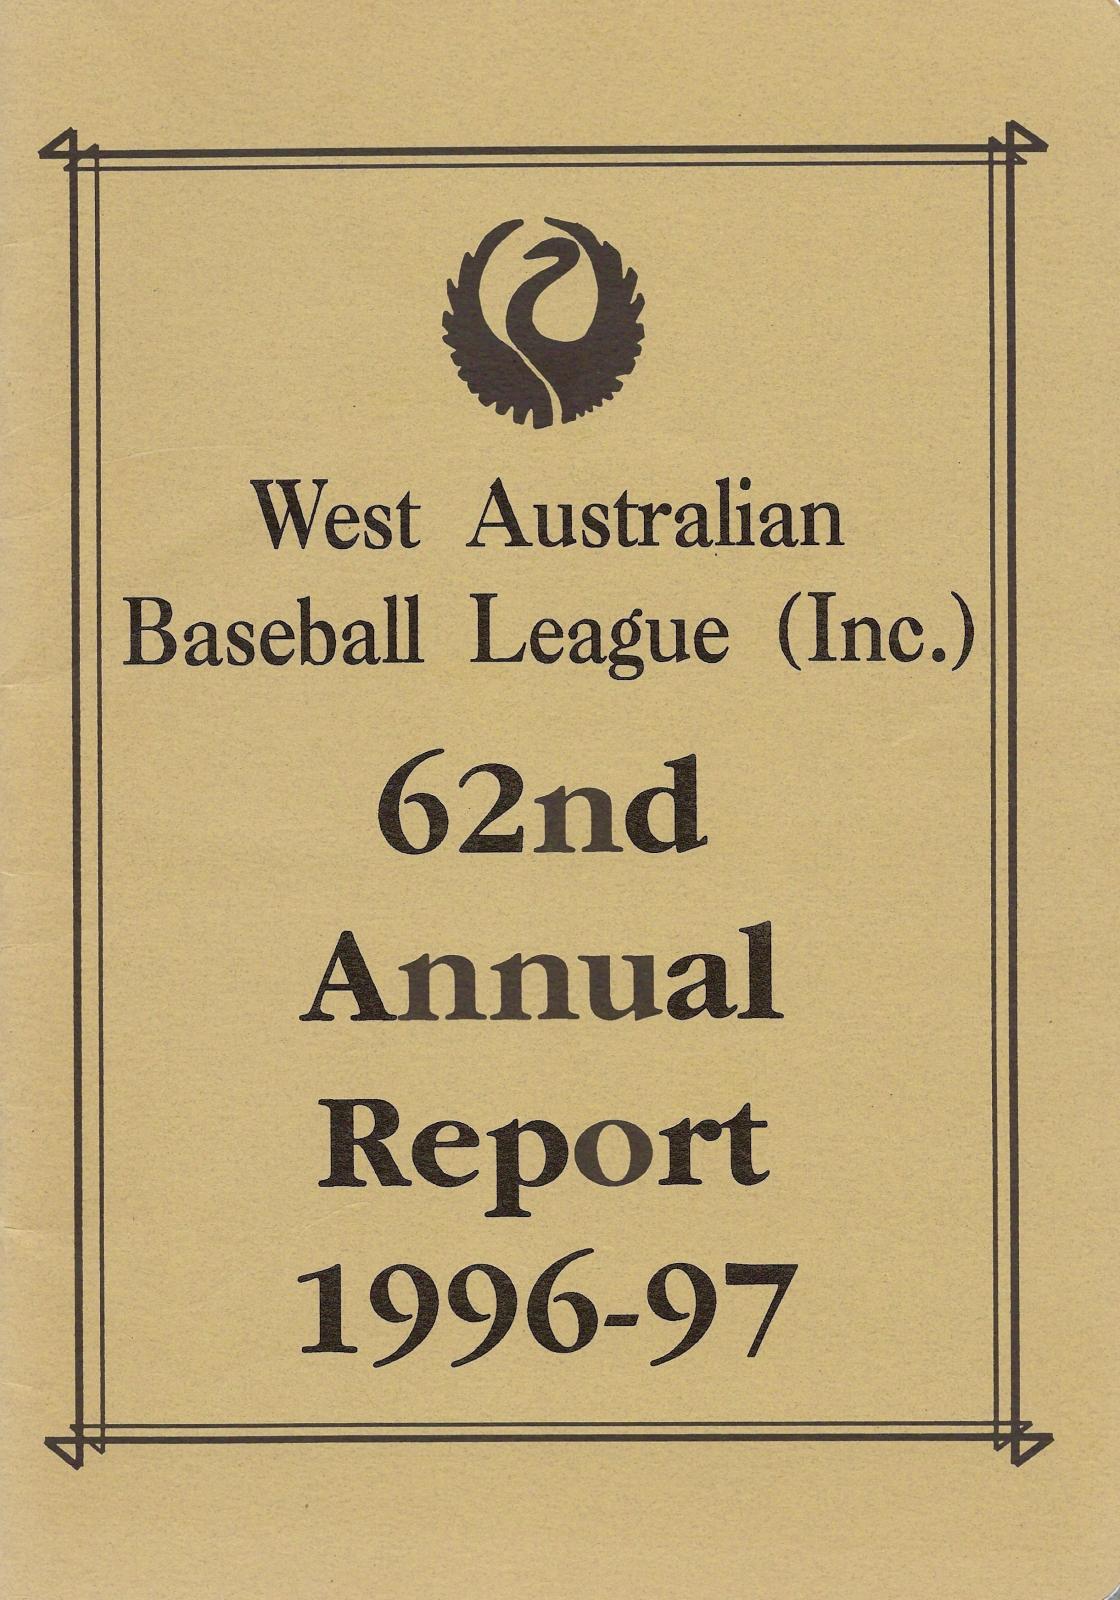 West Australian Baseball League 62nd Annual Report 1996-97 cover page